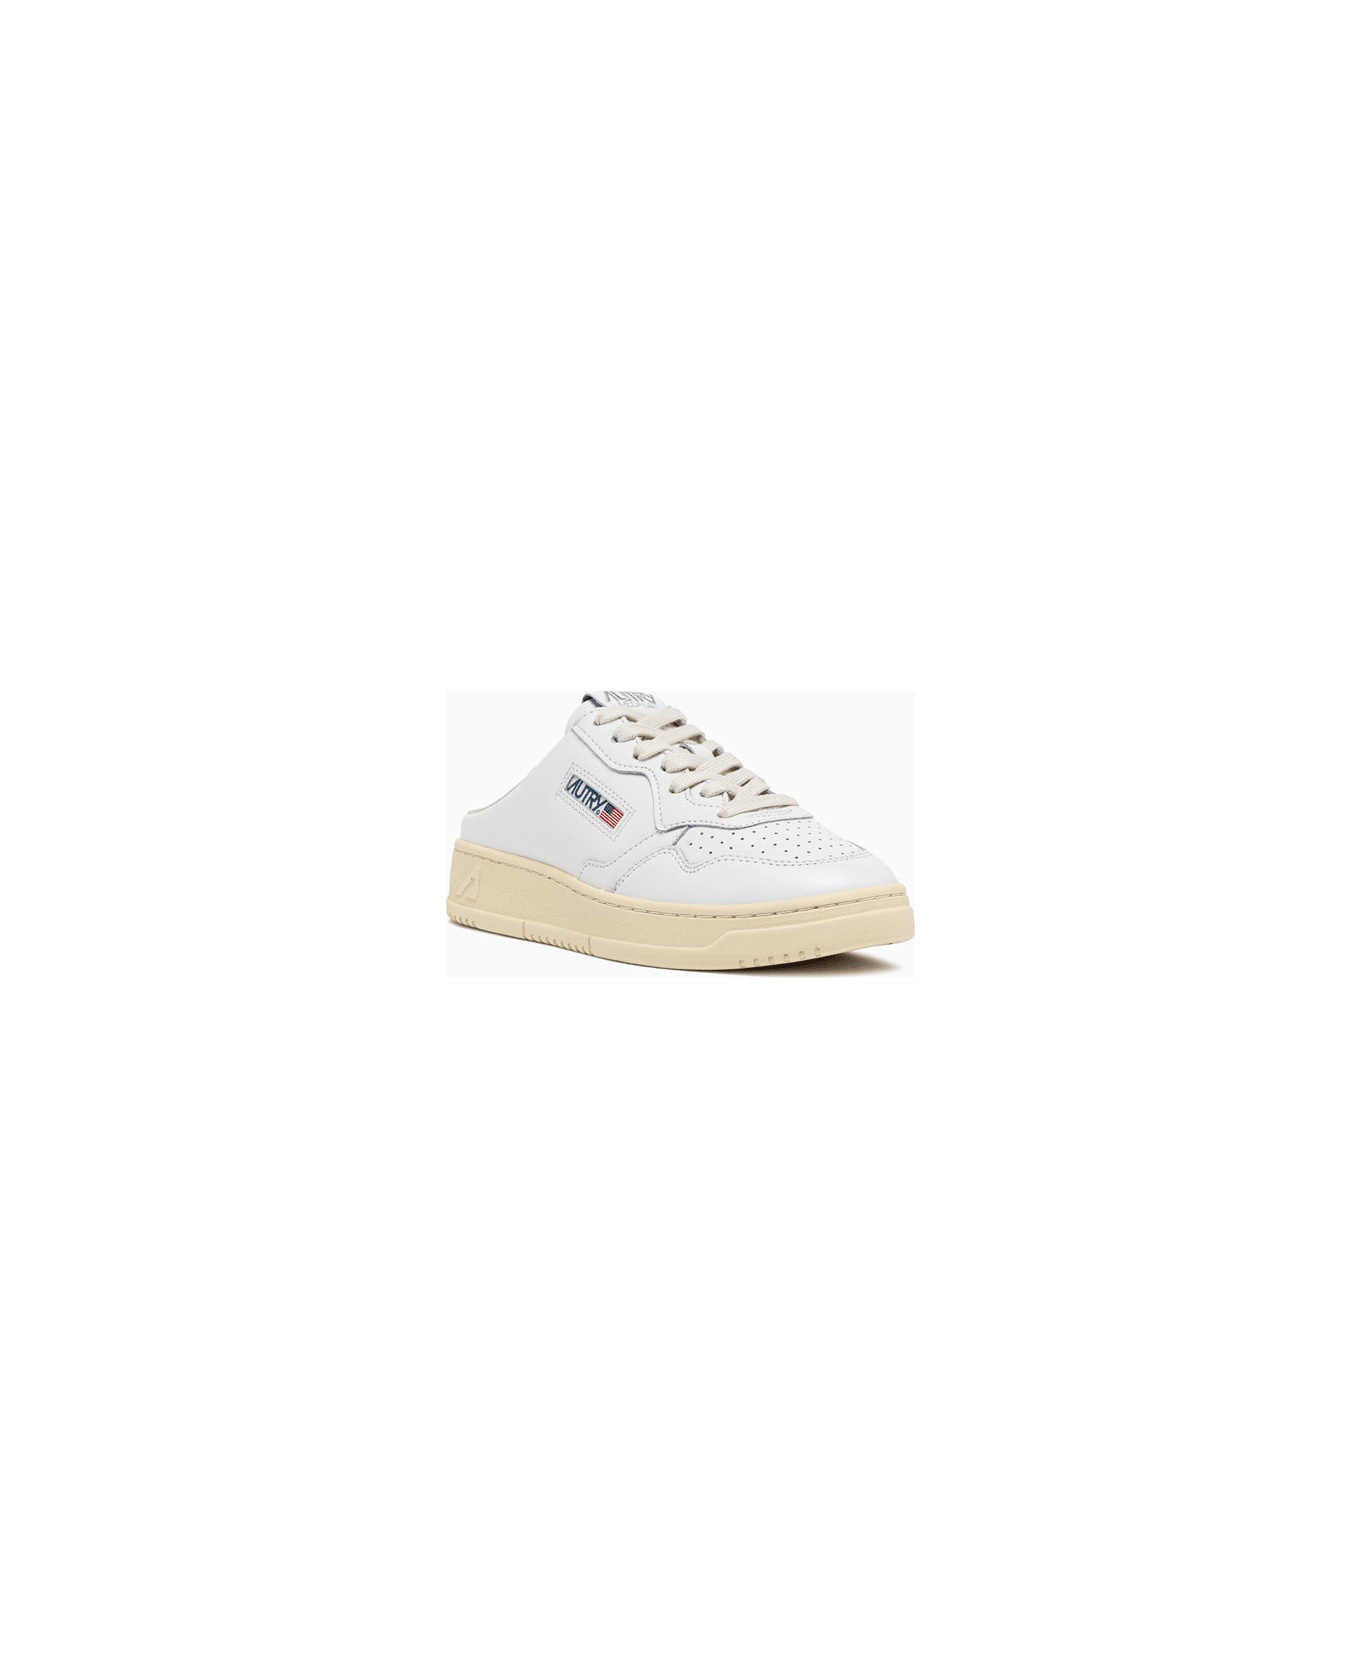 Autry Medalist Mule Sneakers Mulw Ll15 - White フラットシューズ